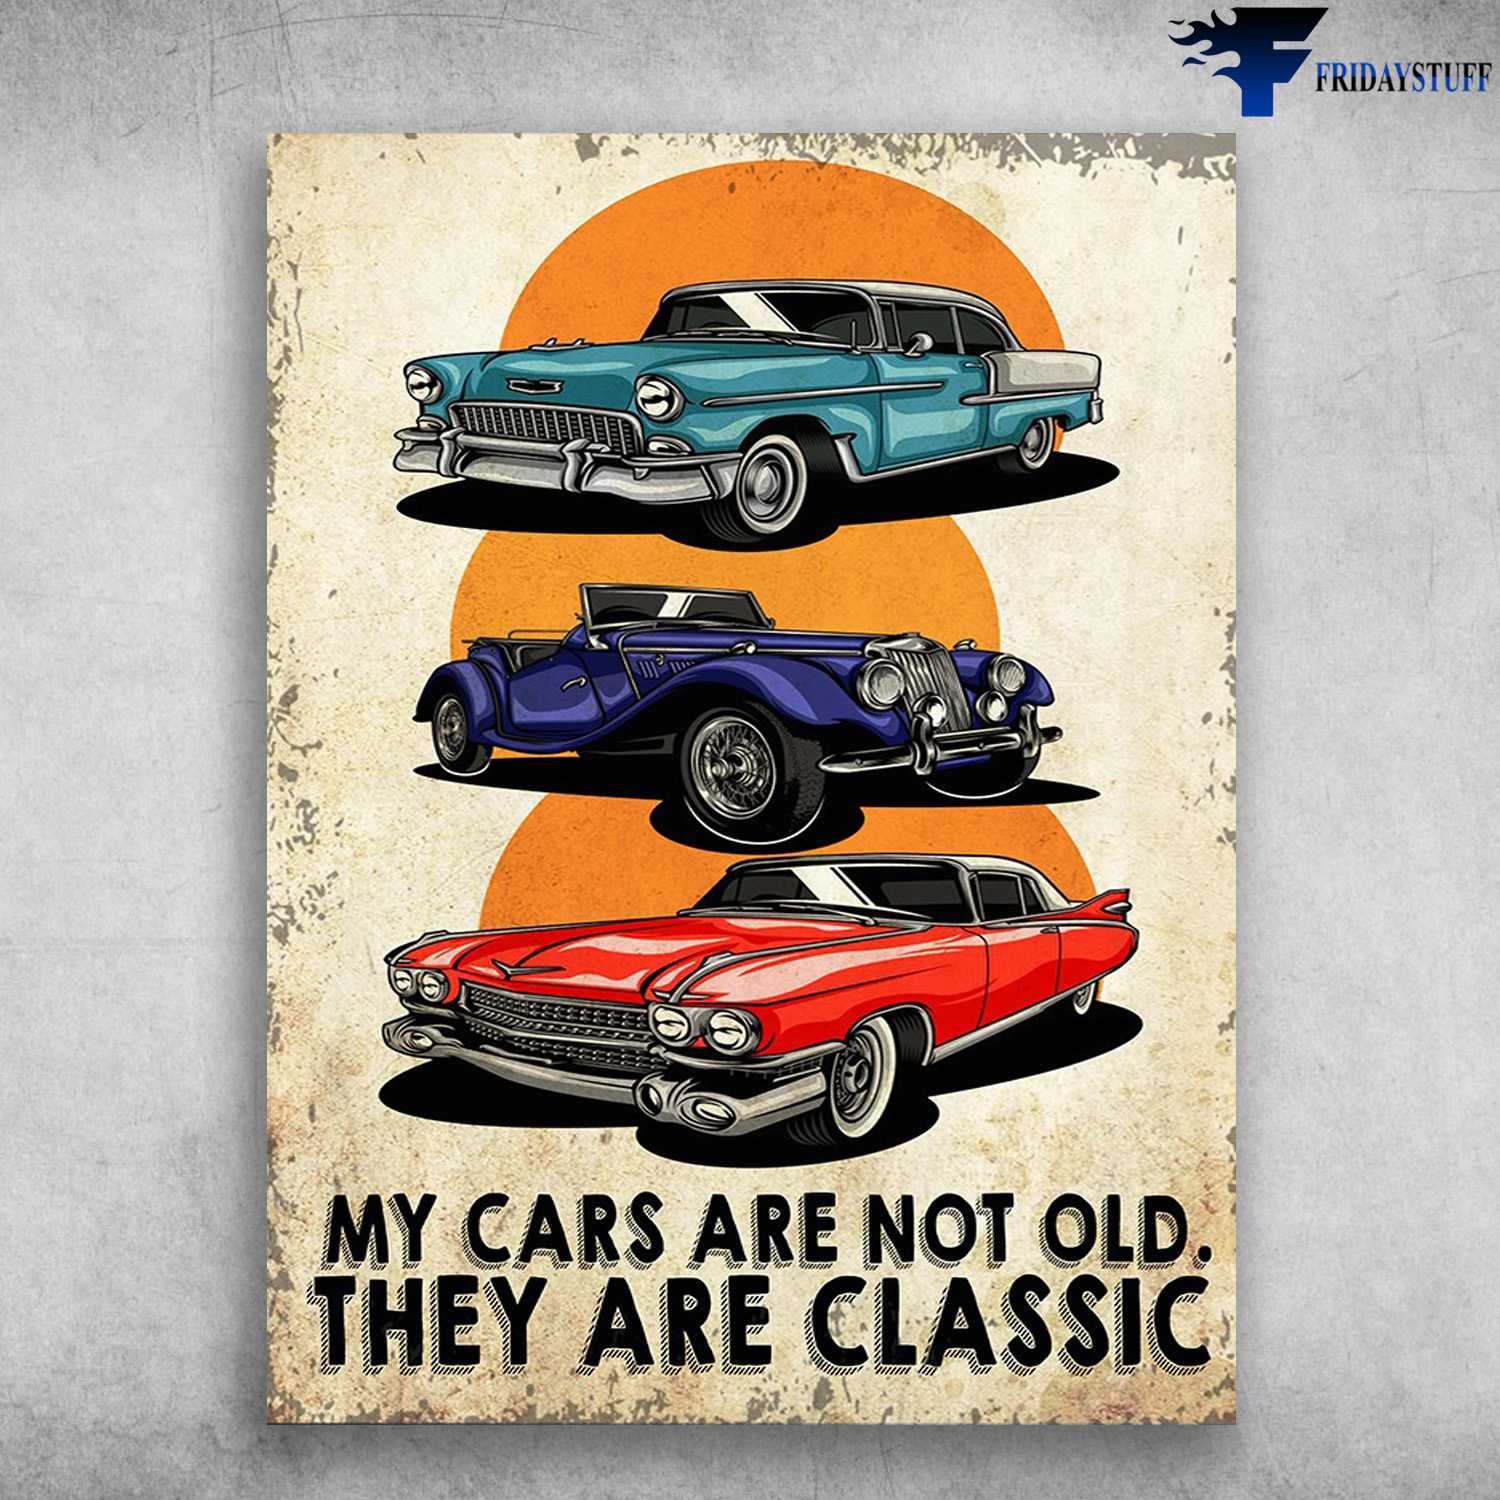 Car Lover, Old Car Poster - My Cars Are Not Old, They Are Classic